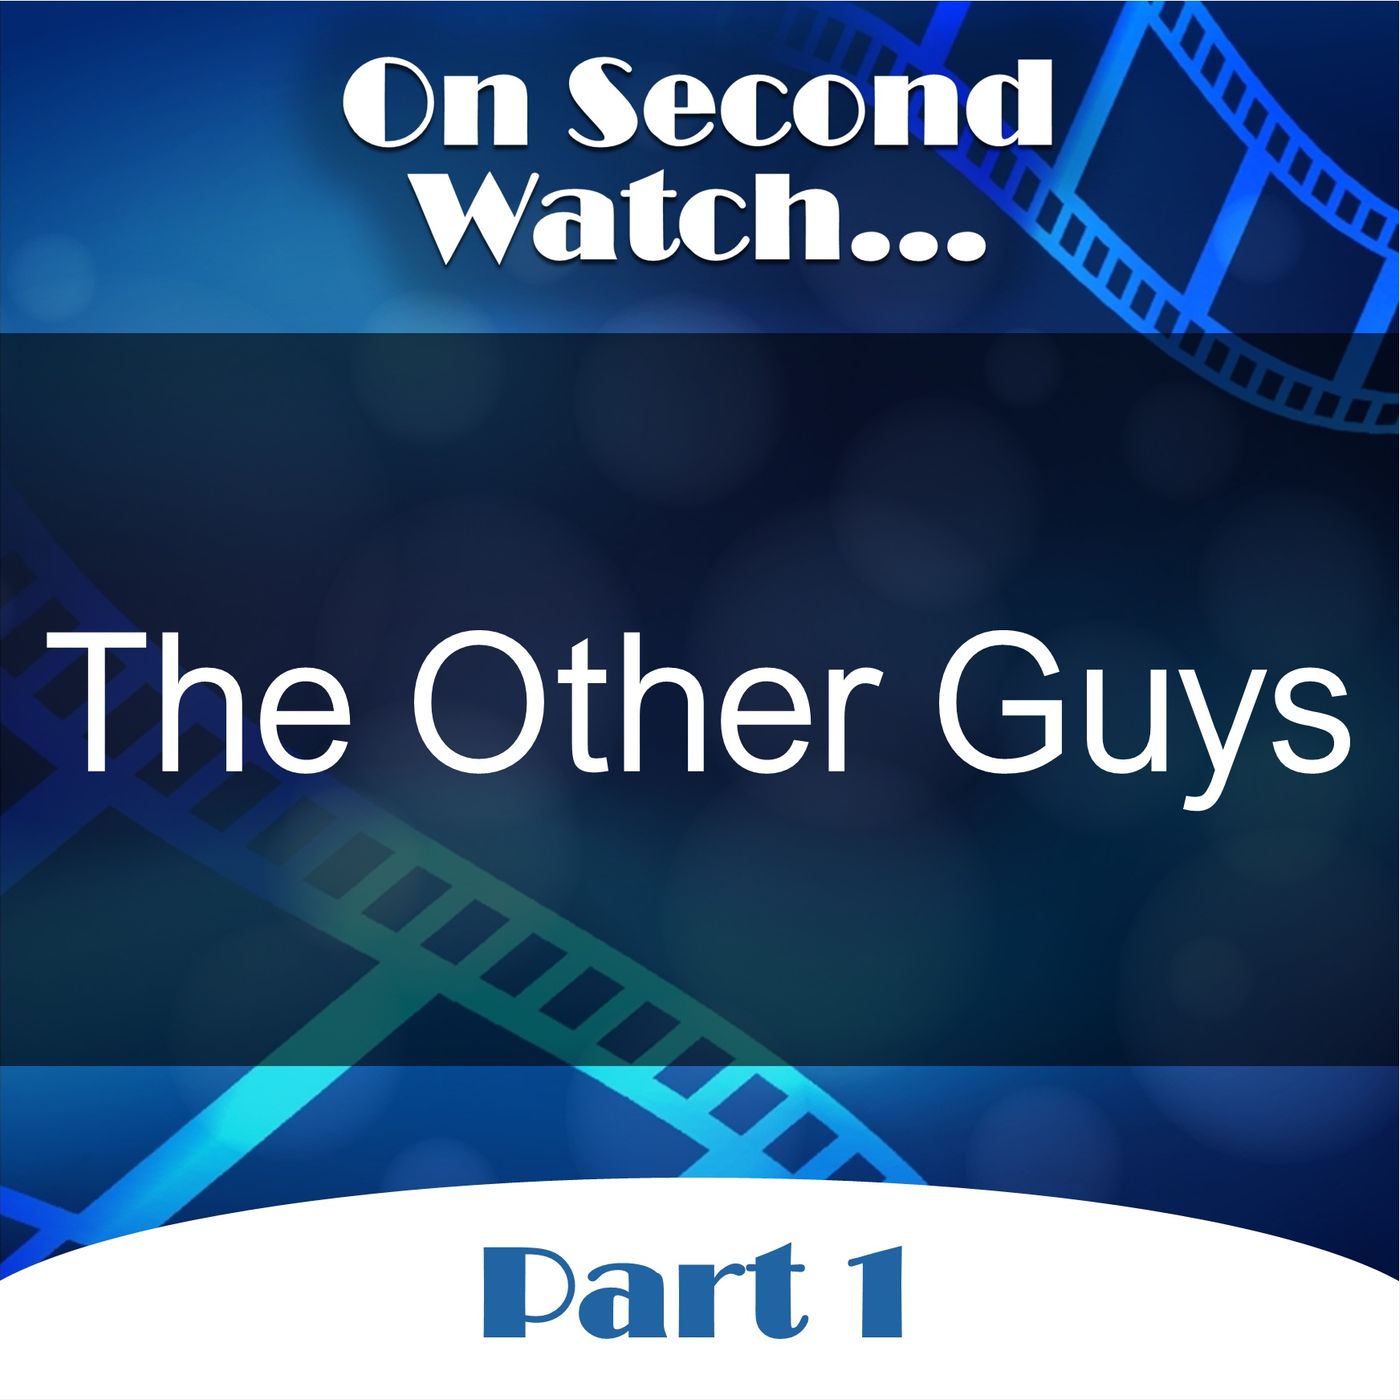 The Other Guys (2010) - Part 1, Nostalgia Review